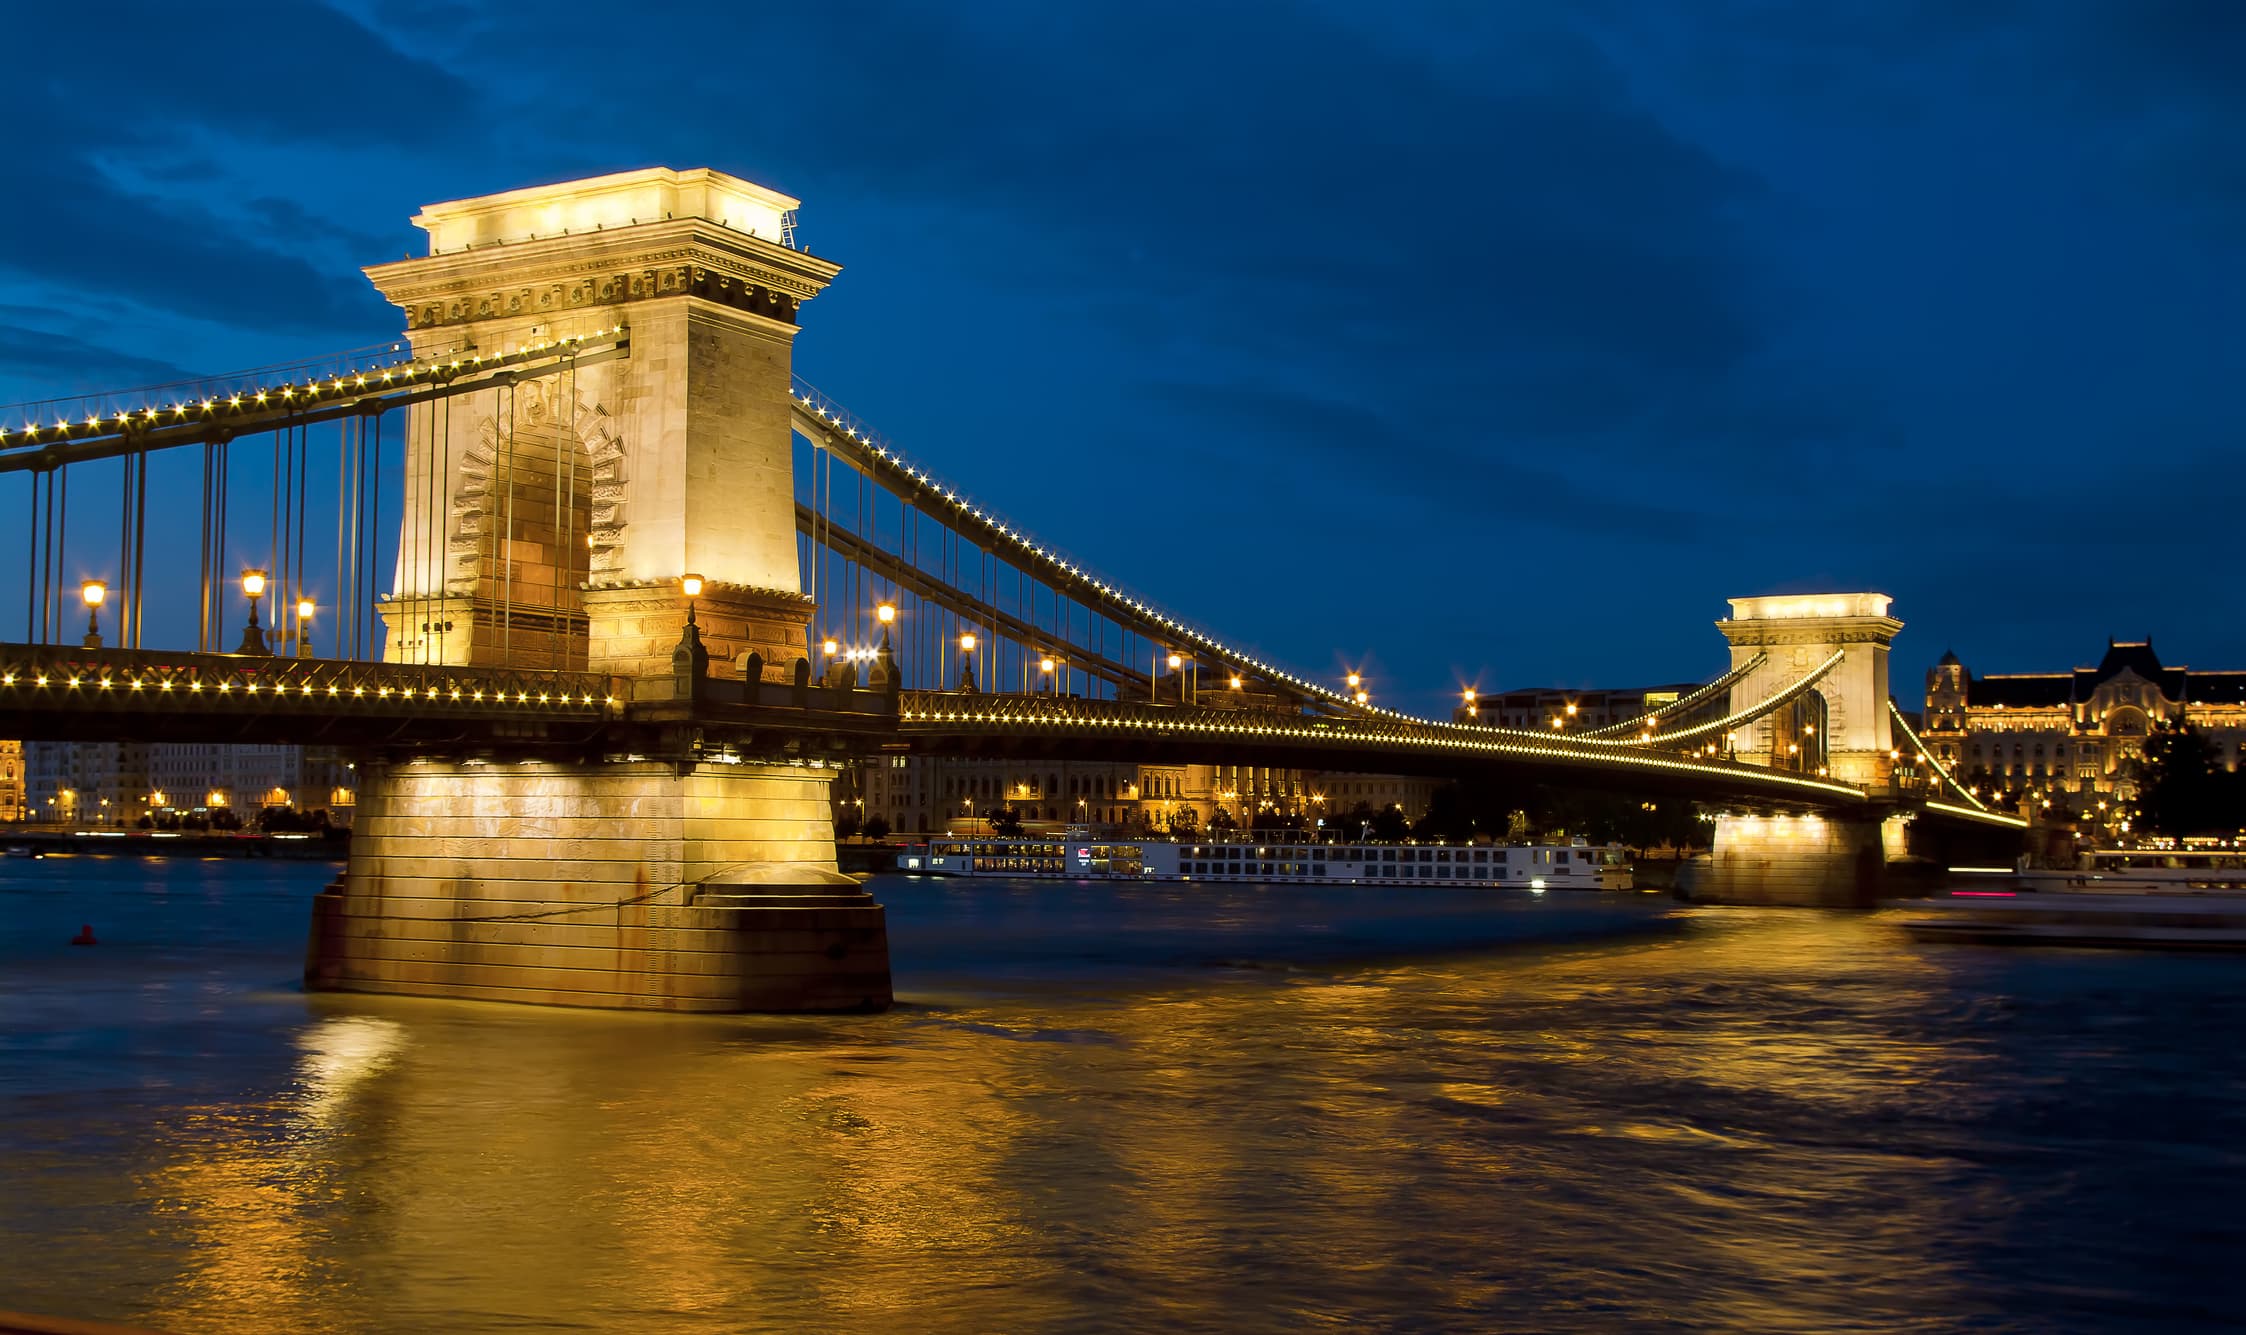 View of the Danube River at night in Budapest with the iconic chain bridge.